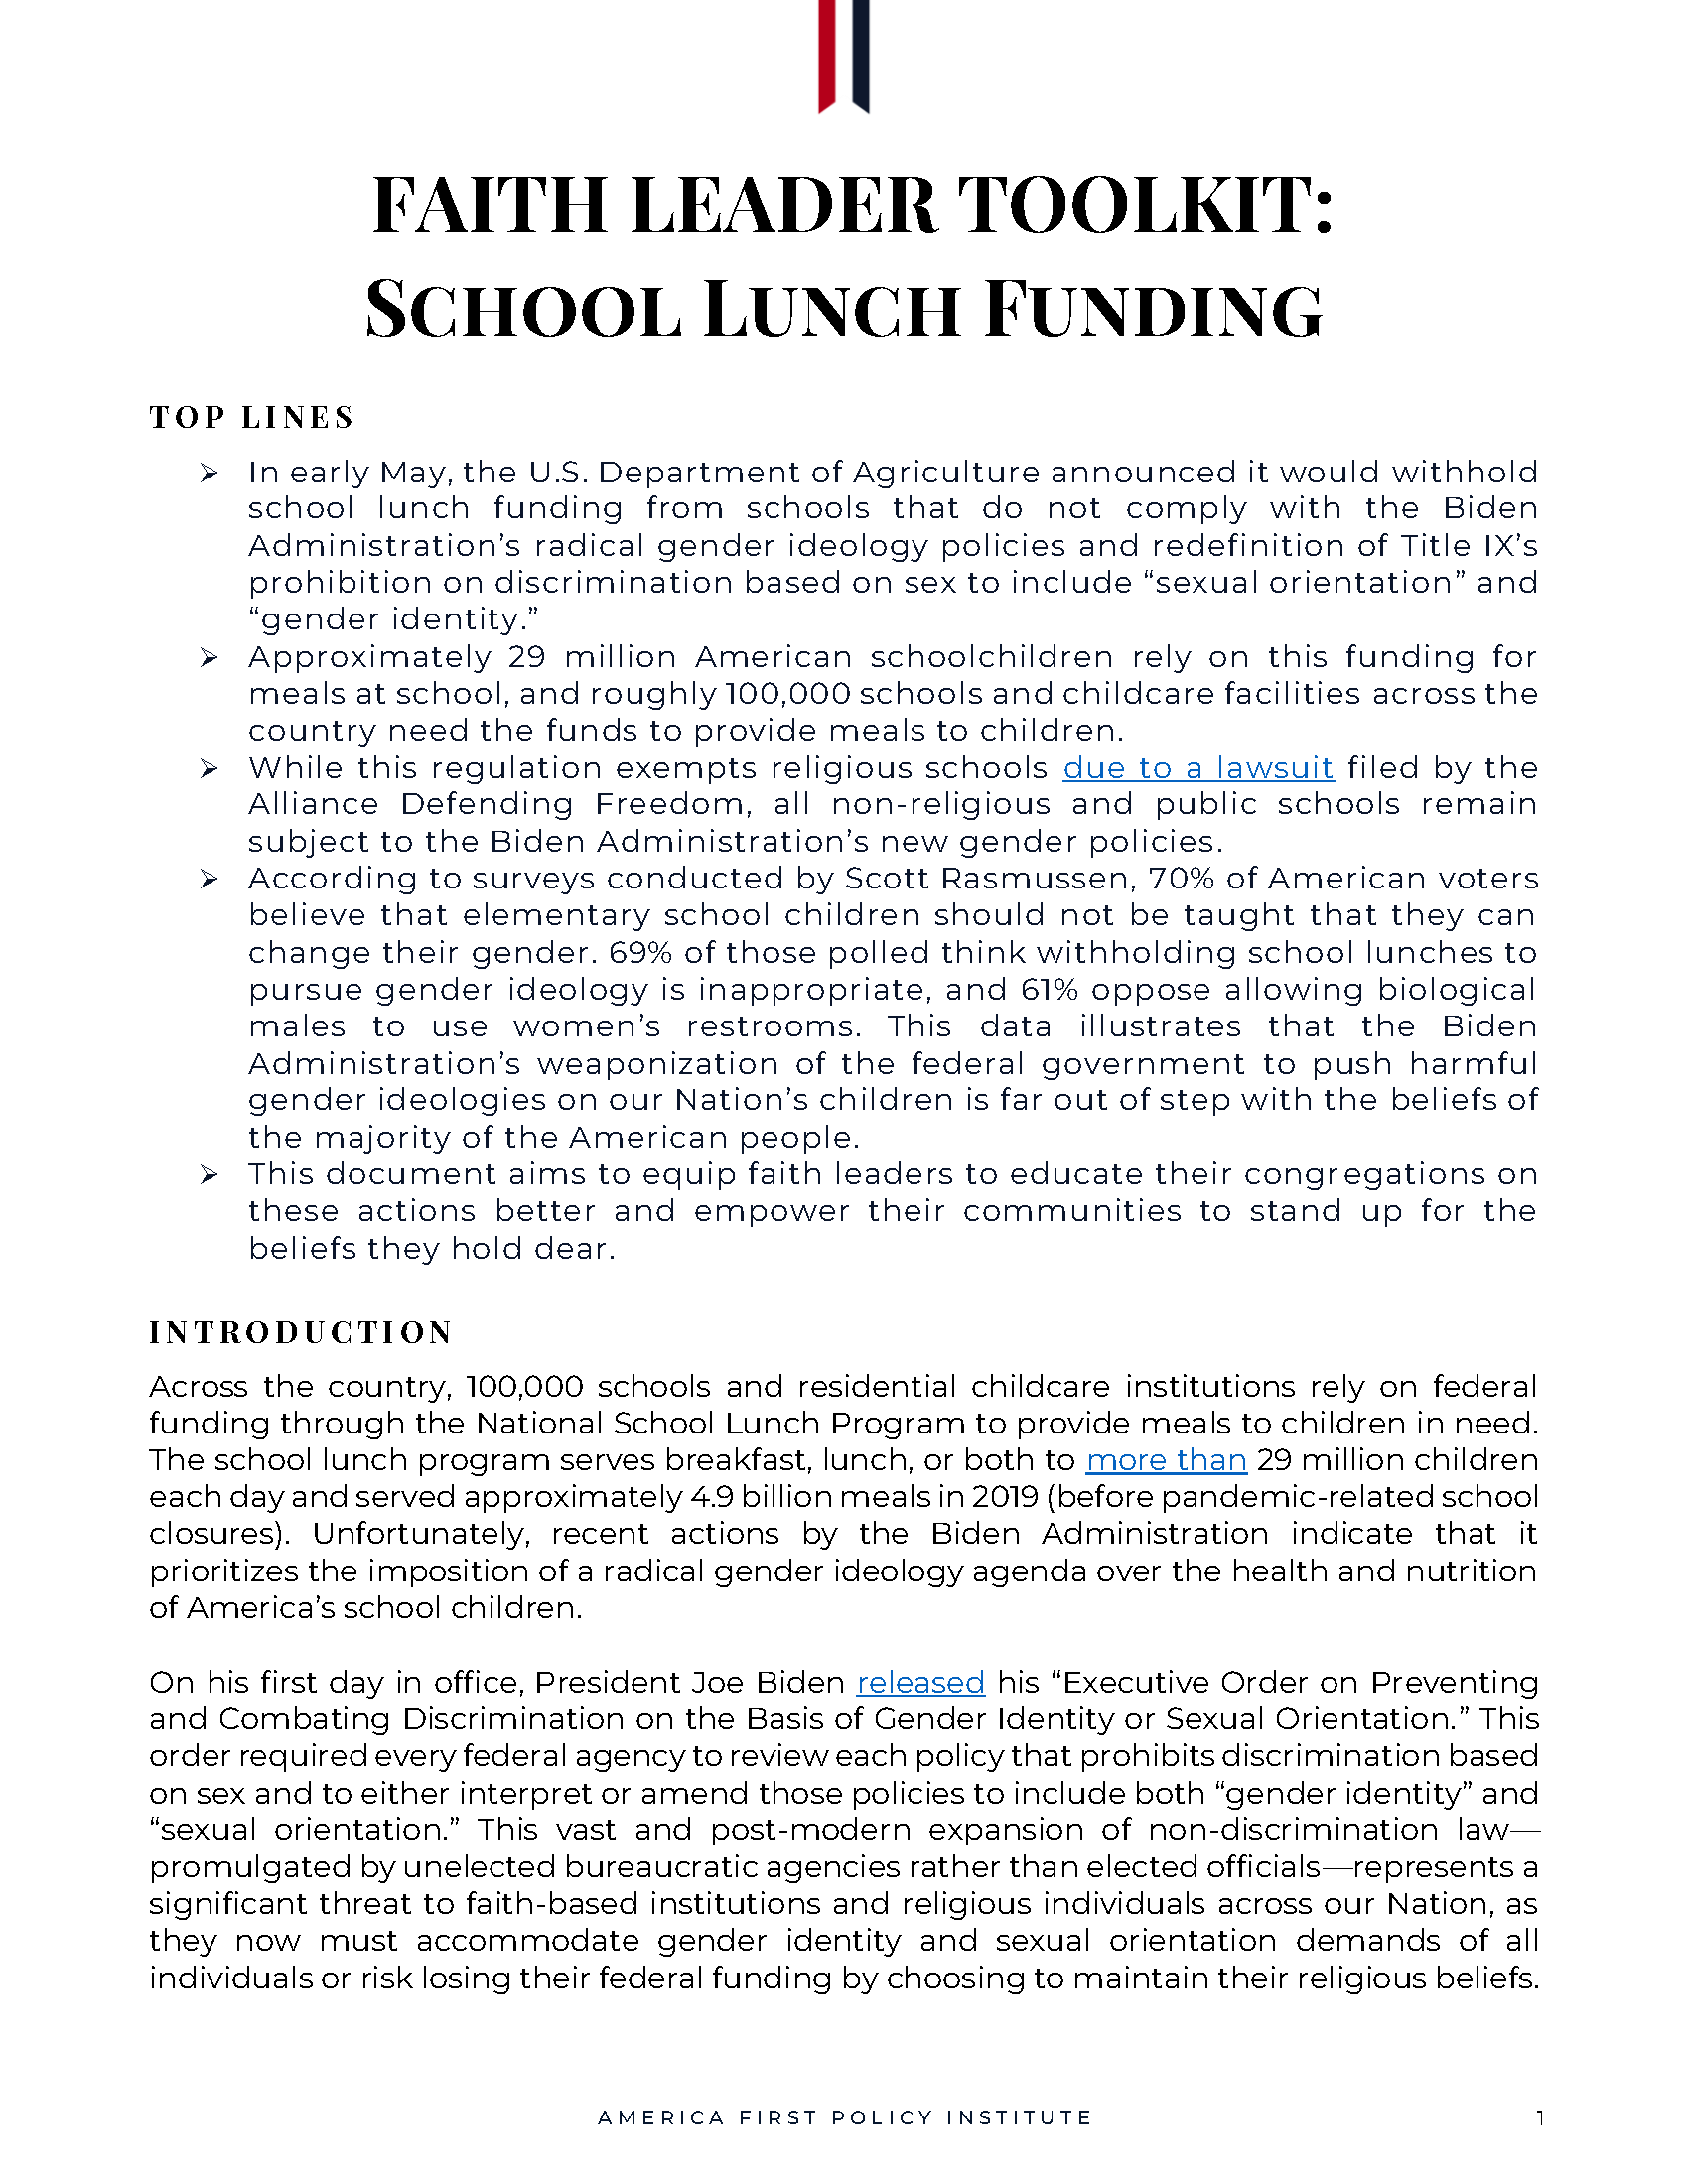 Faith Leader Toolkit School Lunch Funding image